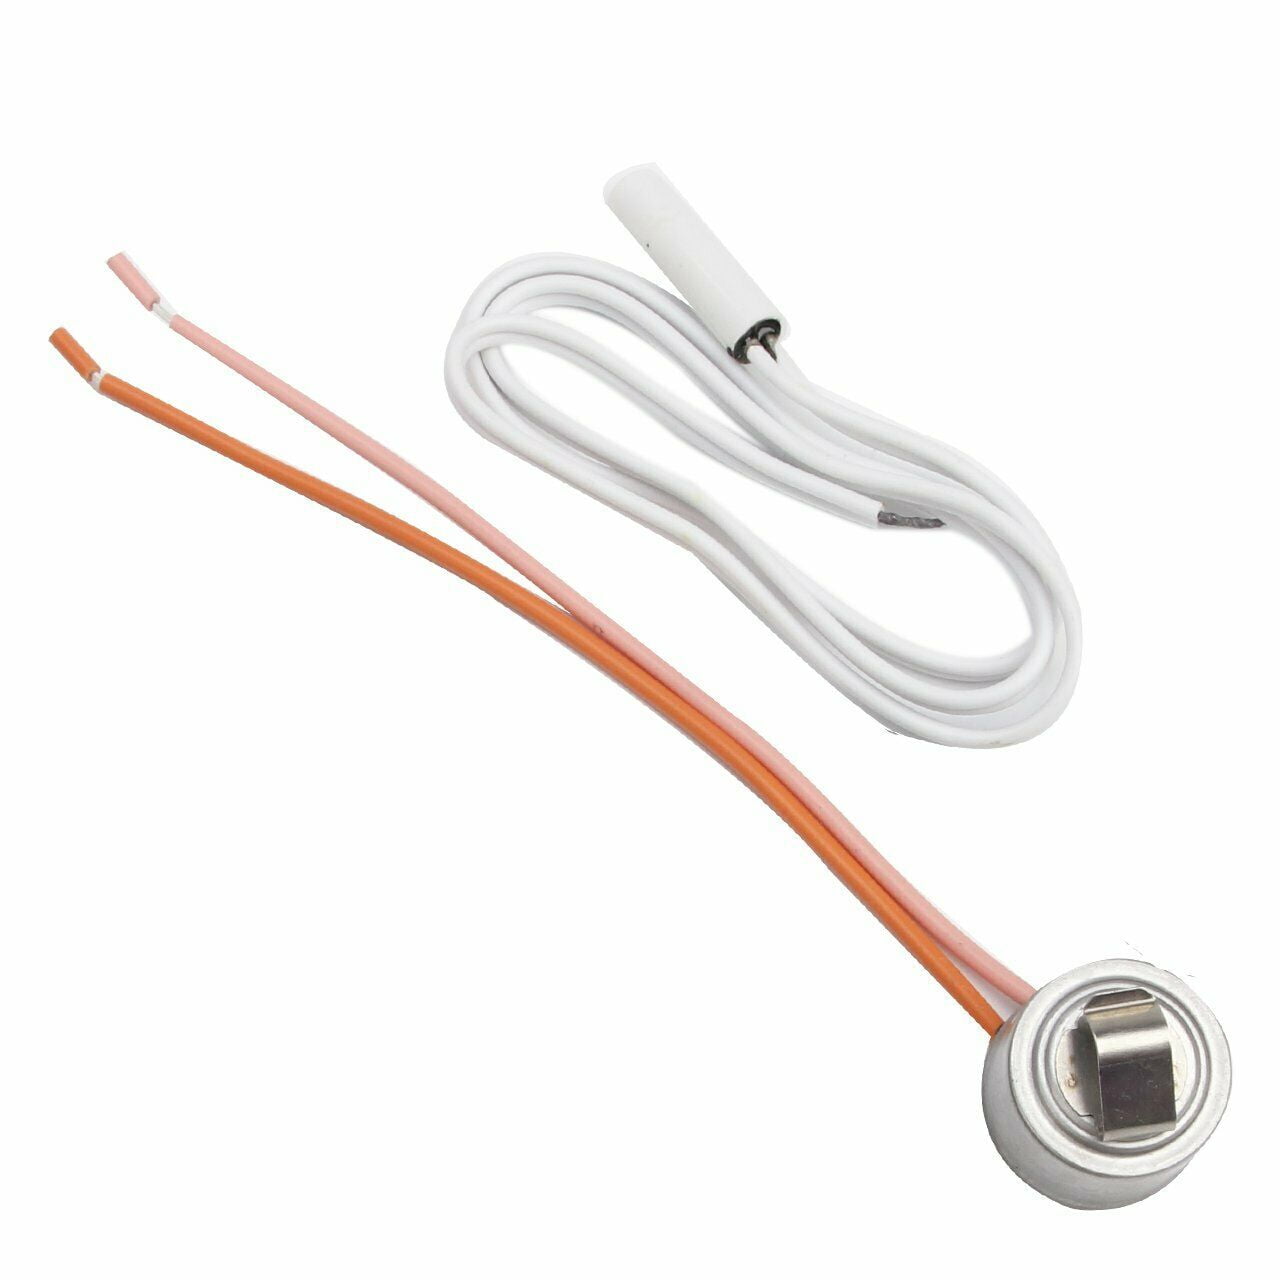 Details about   Electric Refrigerator Defrost Heater Kits WR51X10055 For GE Hotpoint RCA General 